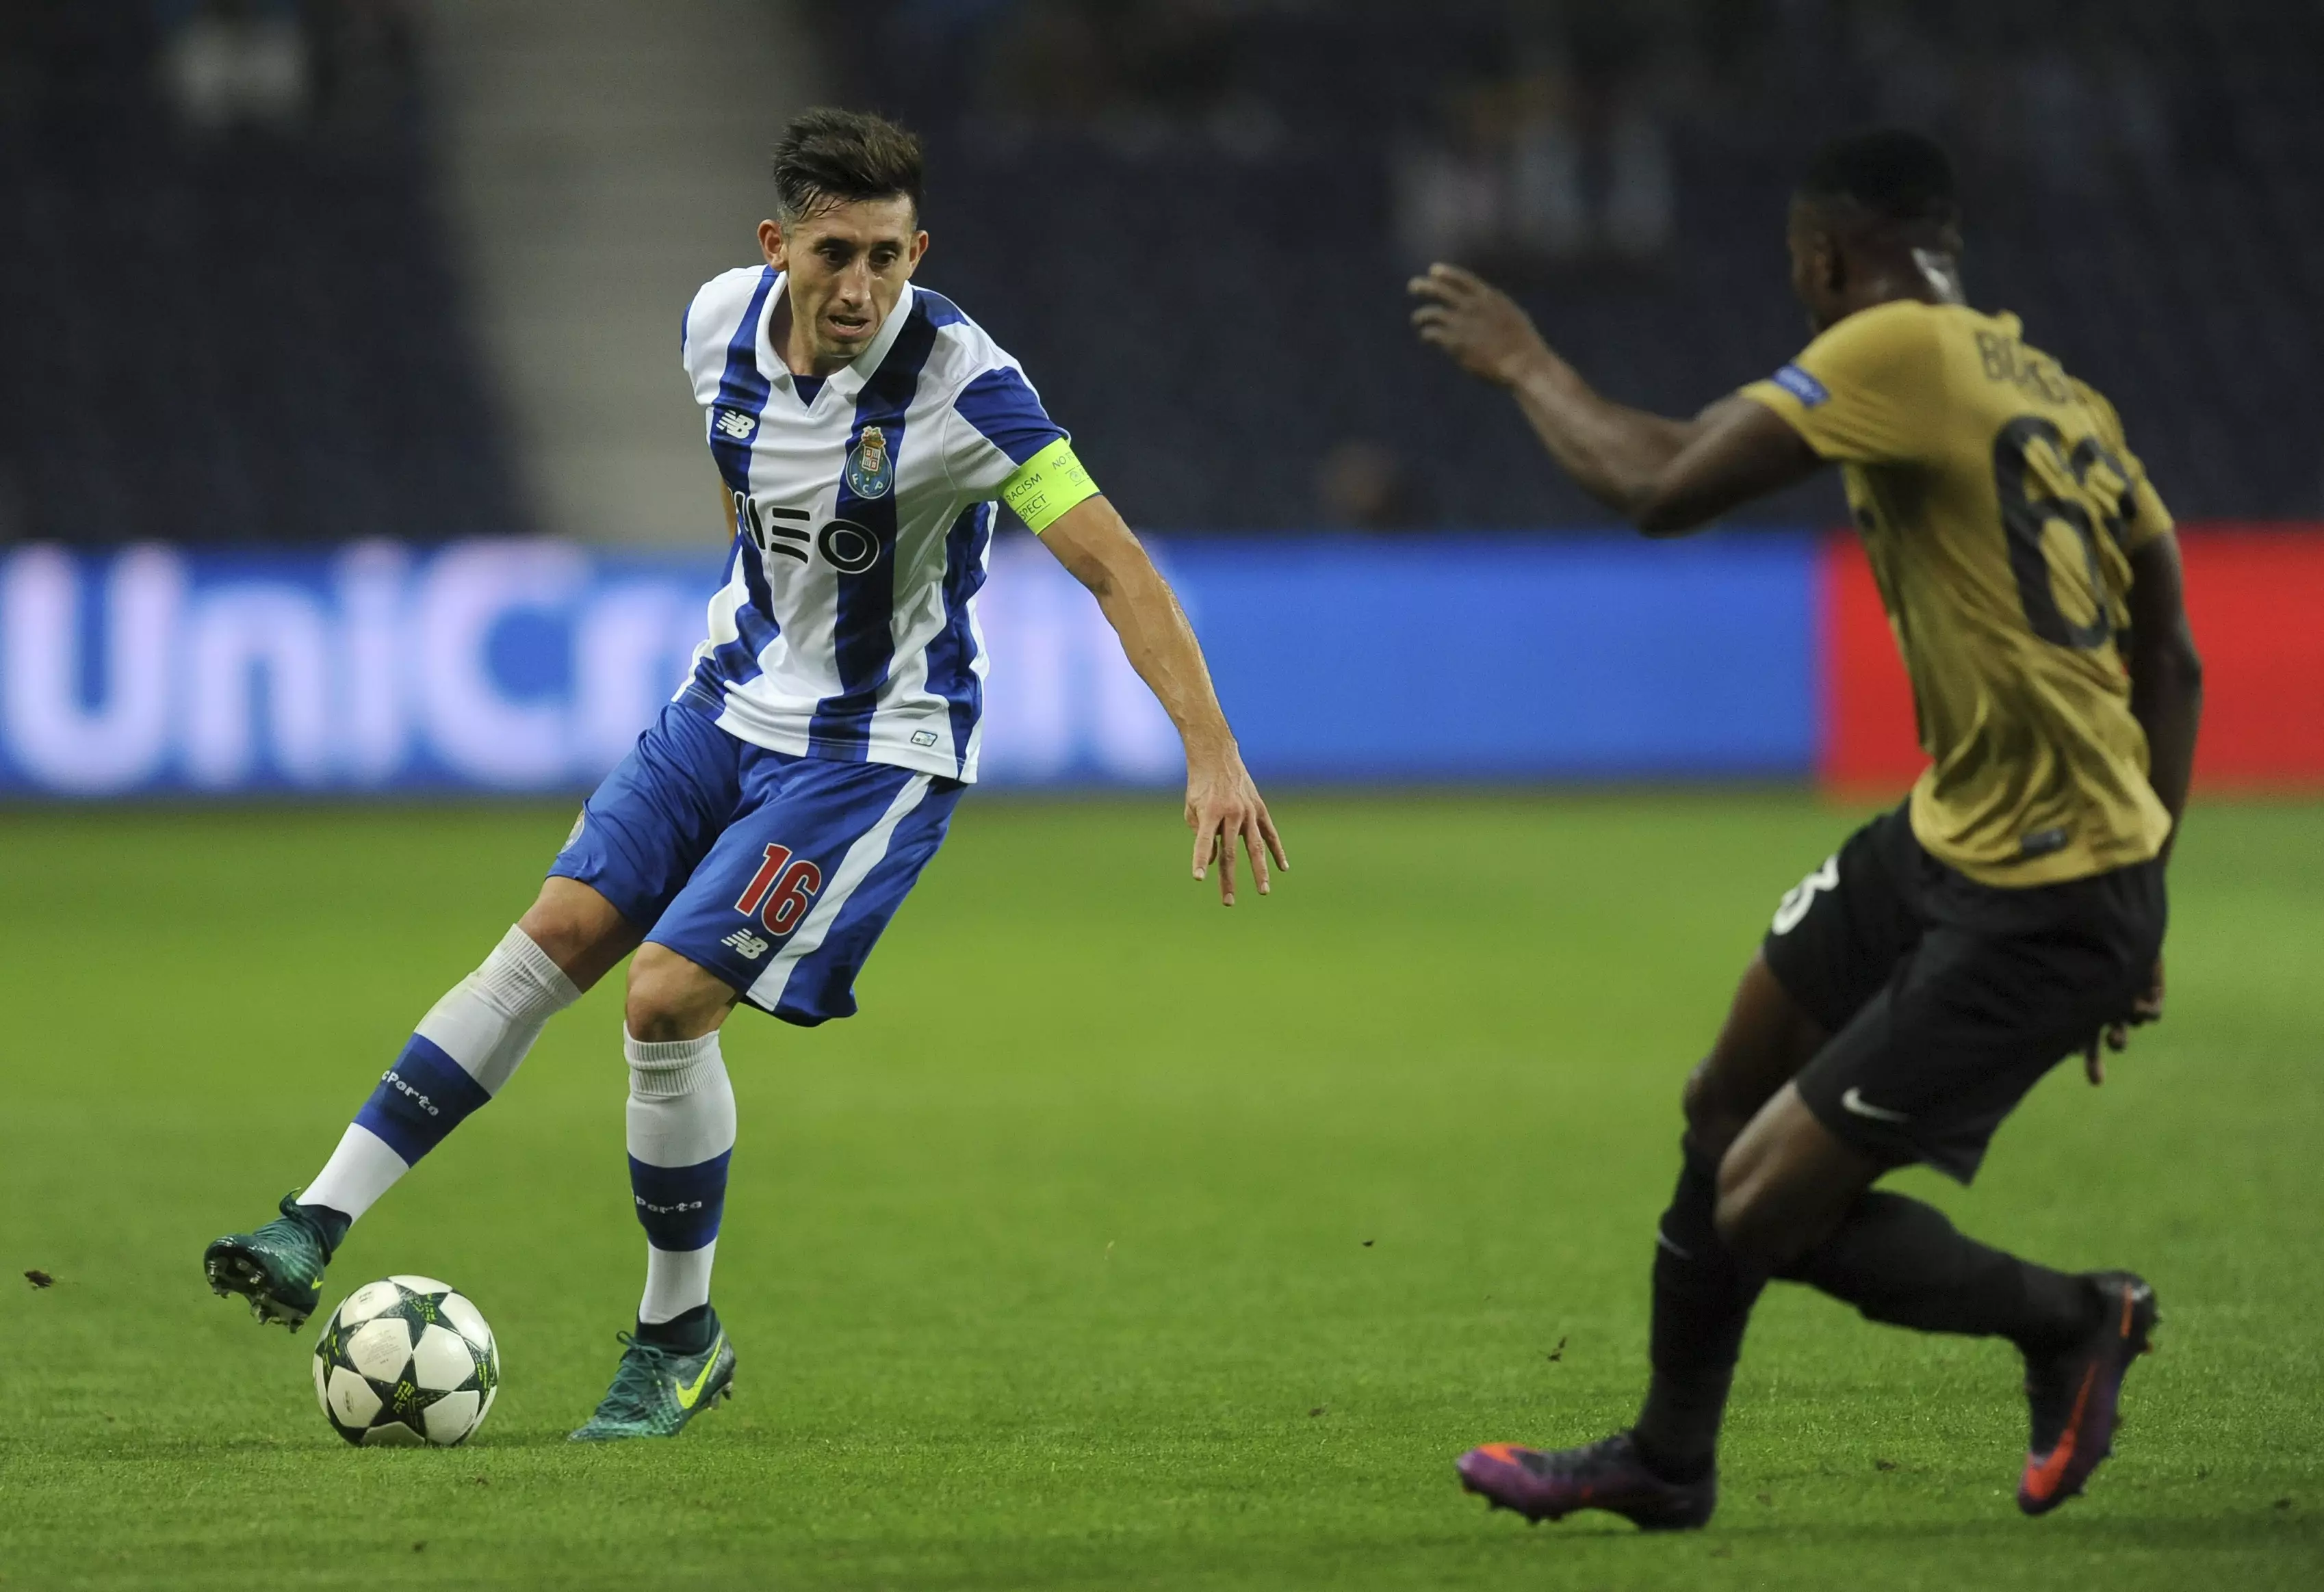 Porto's Hector Herrera Shows Off Gruesome Foot Injury After Juventus Game